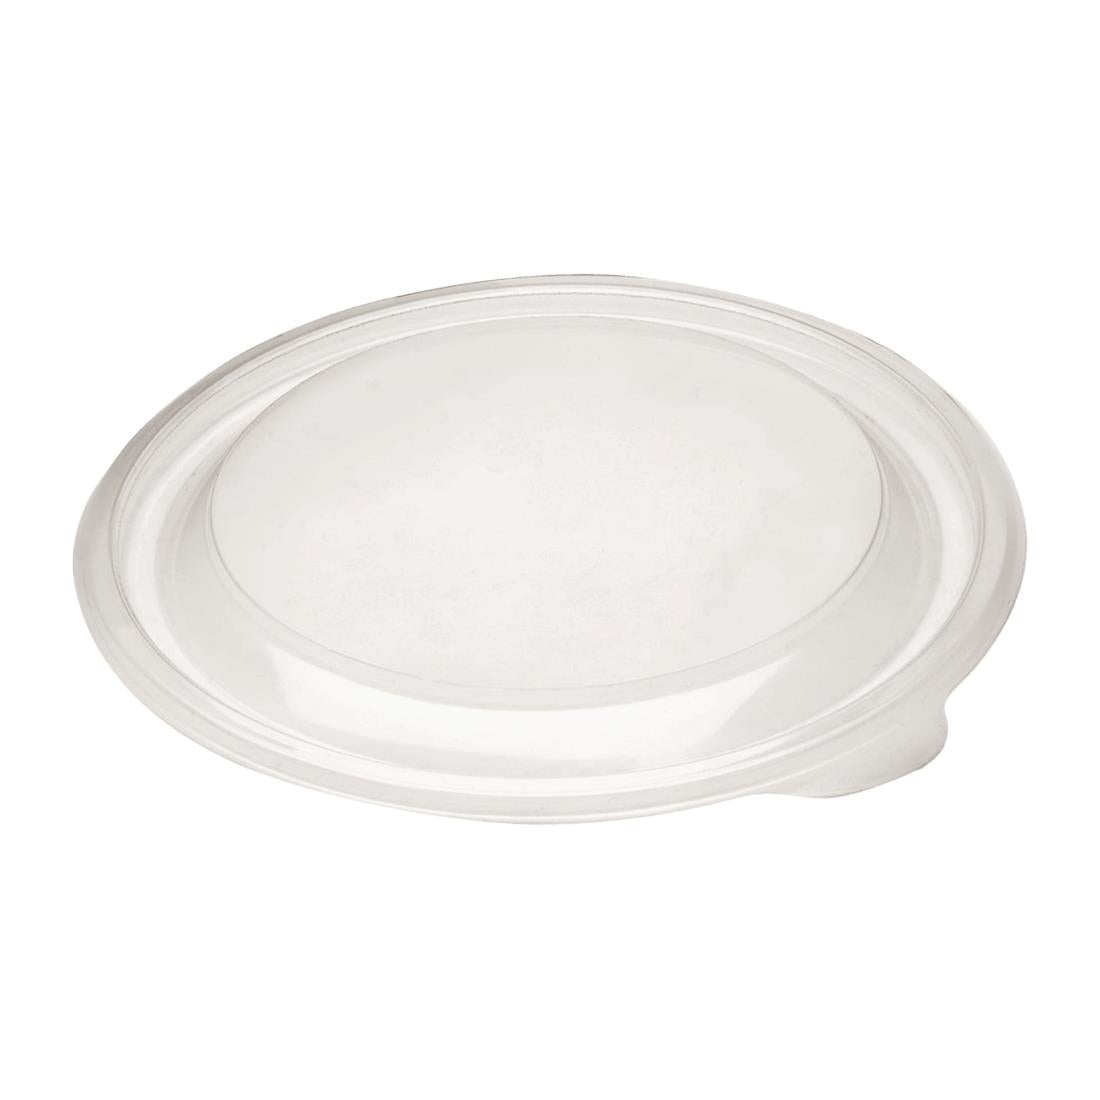 Fastpac Medium Round Food Container Lids 750ml / 26oz and 1000ml / 35oz JD Catering Equipment Solutions Ltd